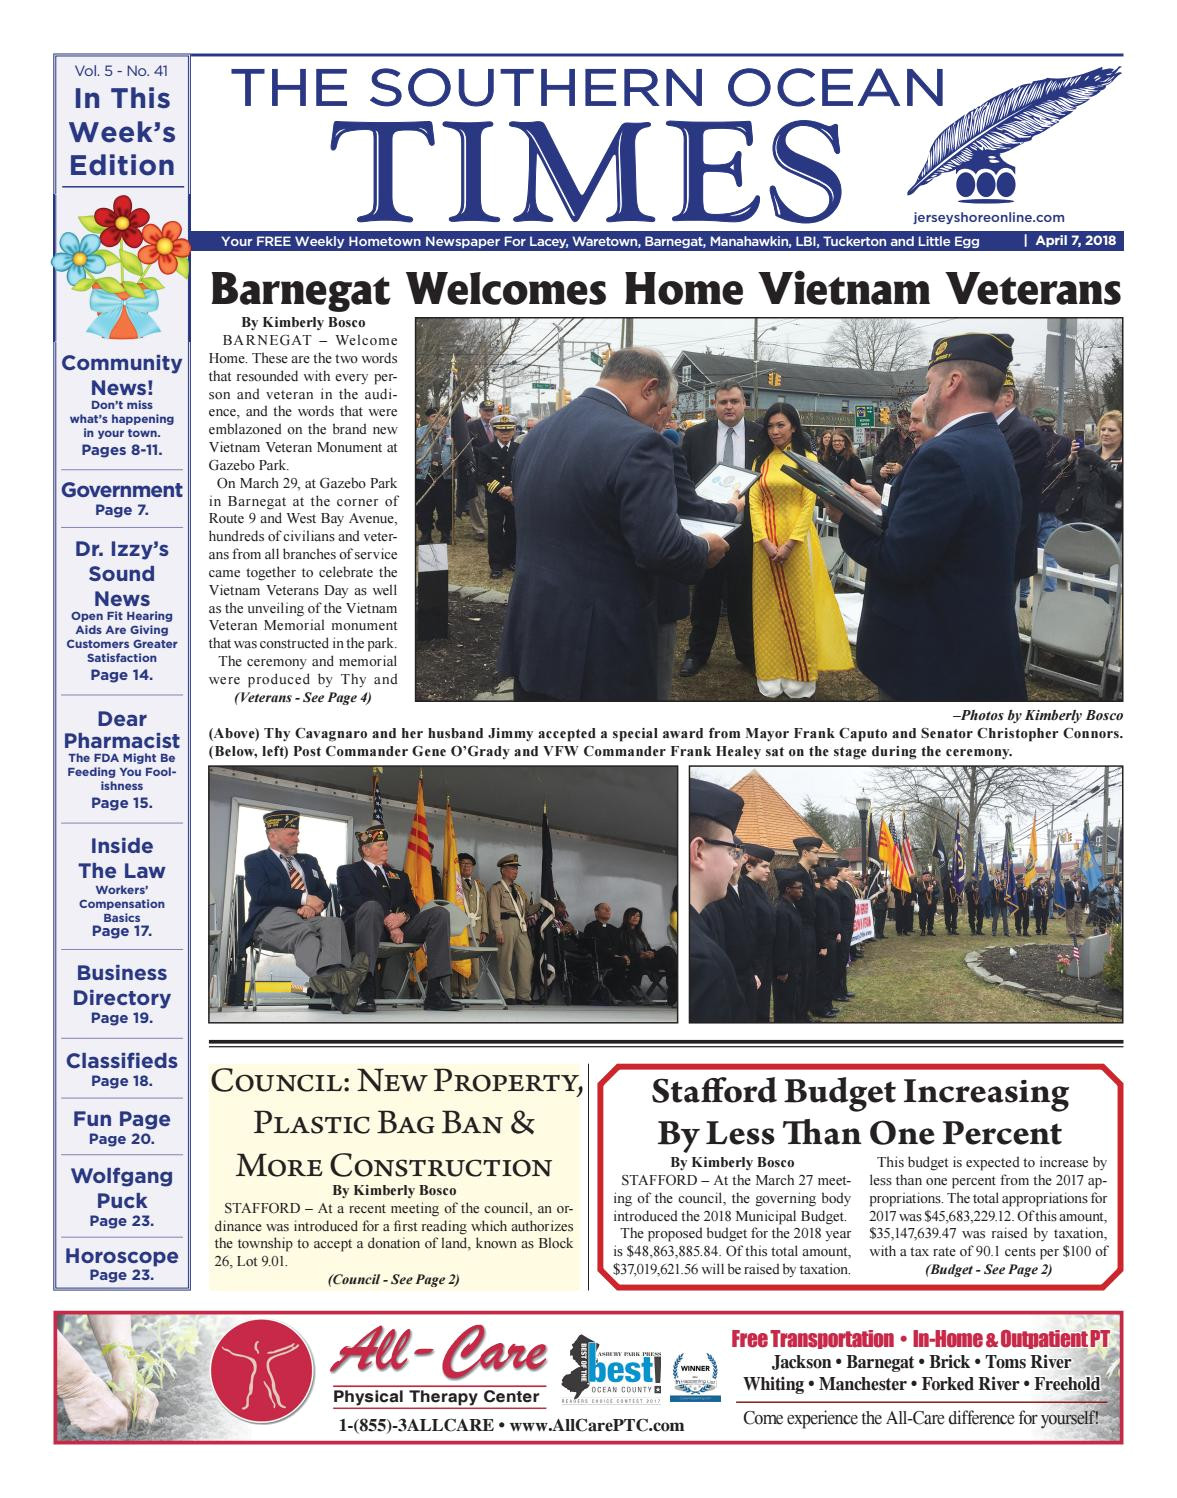 2018 04 07 the southern ocean times by micromedia publications jersey shore online issuu